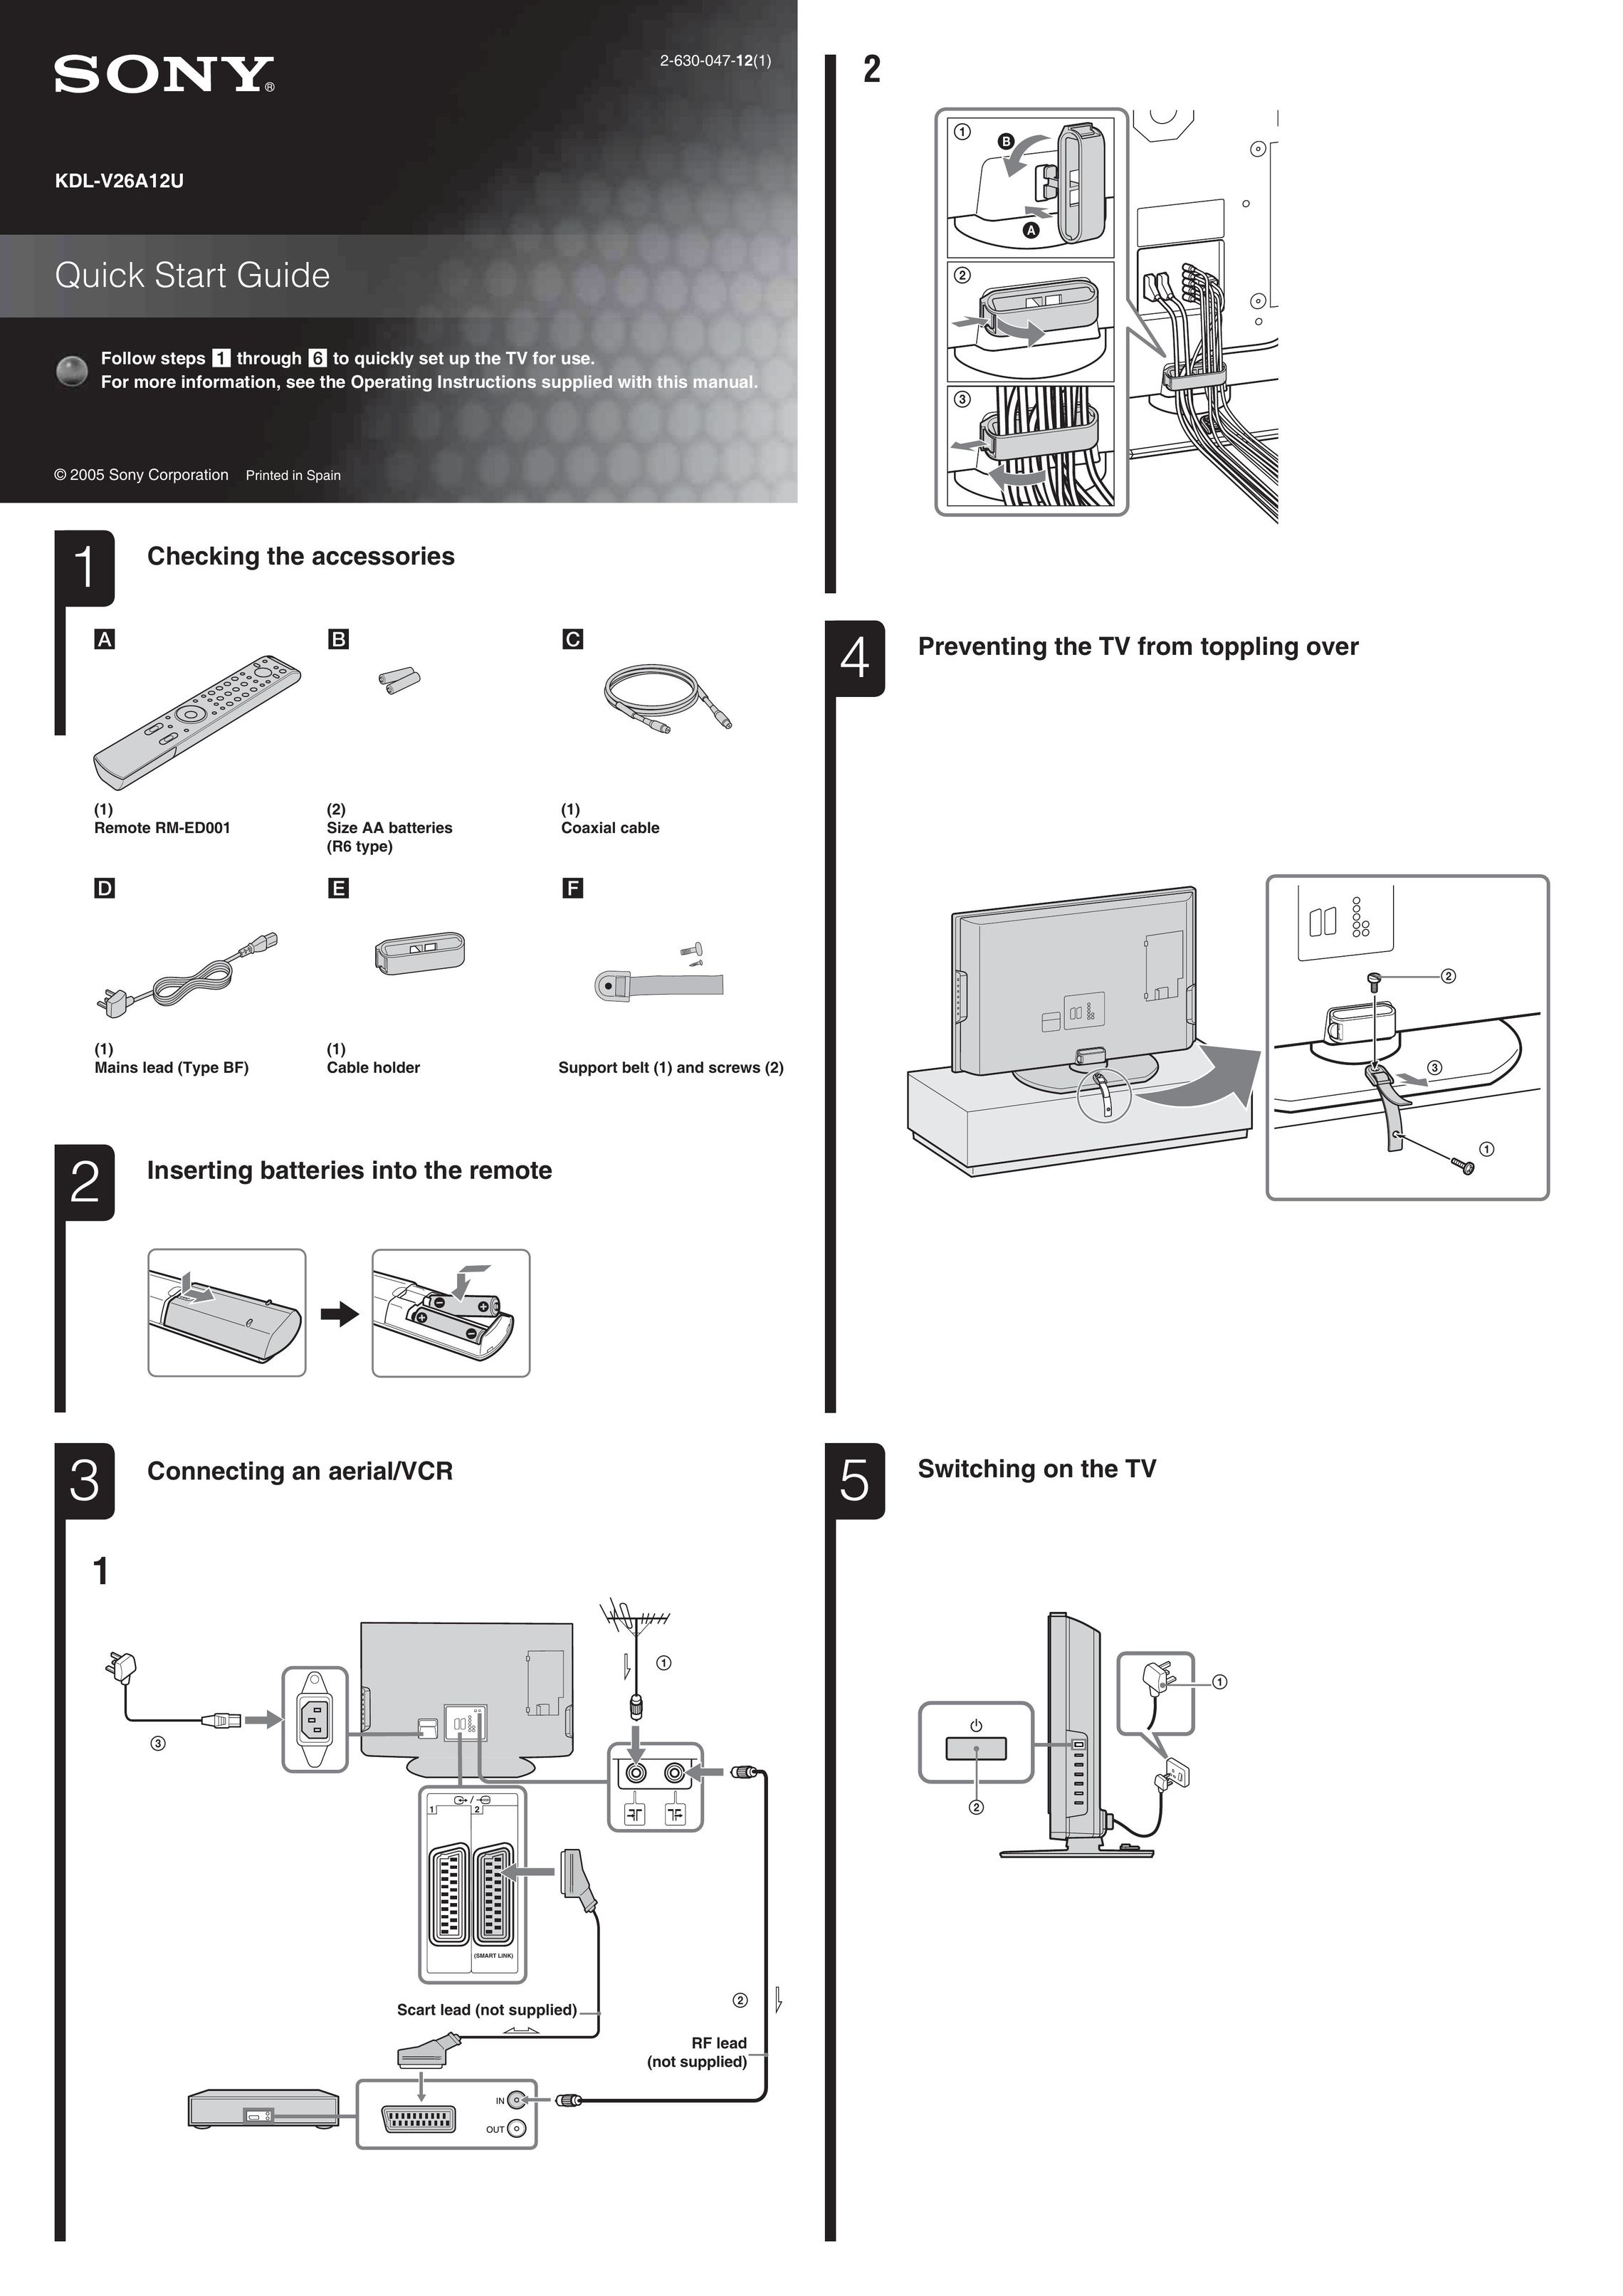 Sony 2-630-047-12(1) CRT Television User Manual